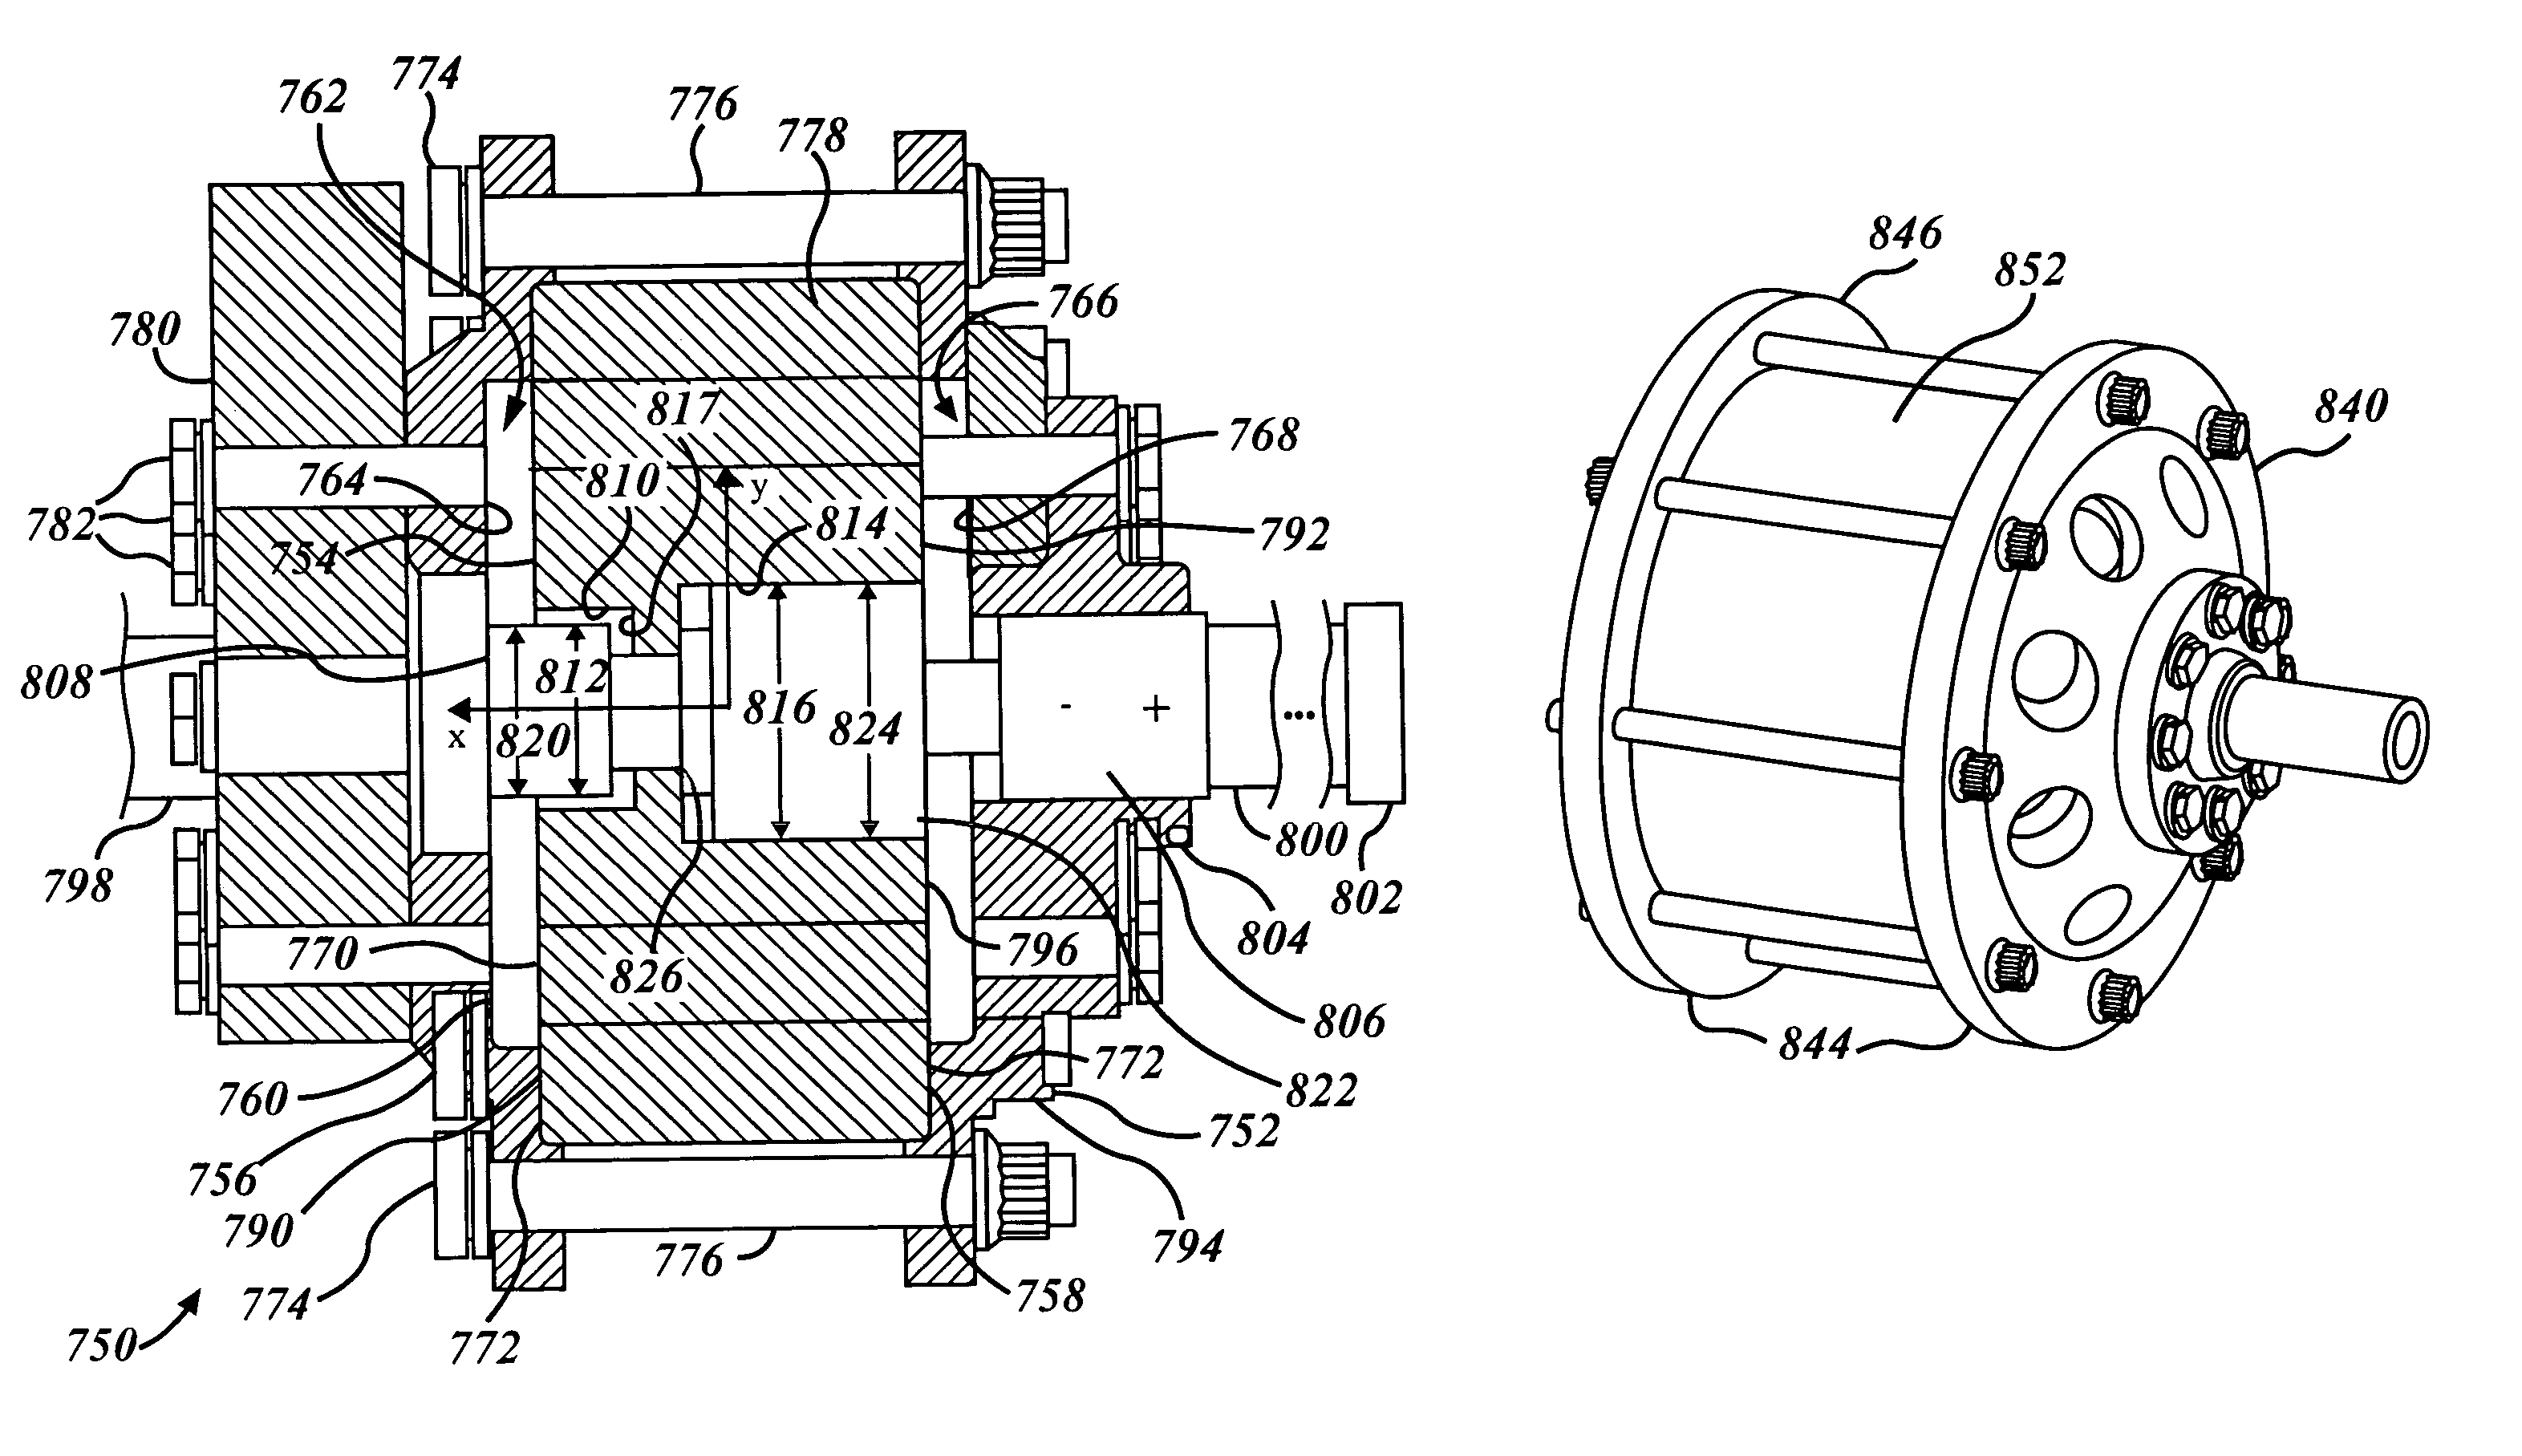 Compliant coupling force control system